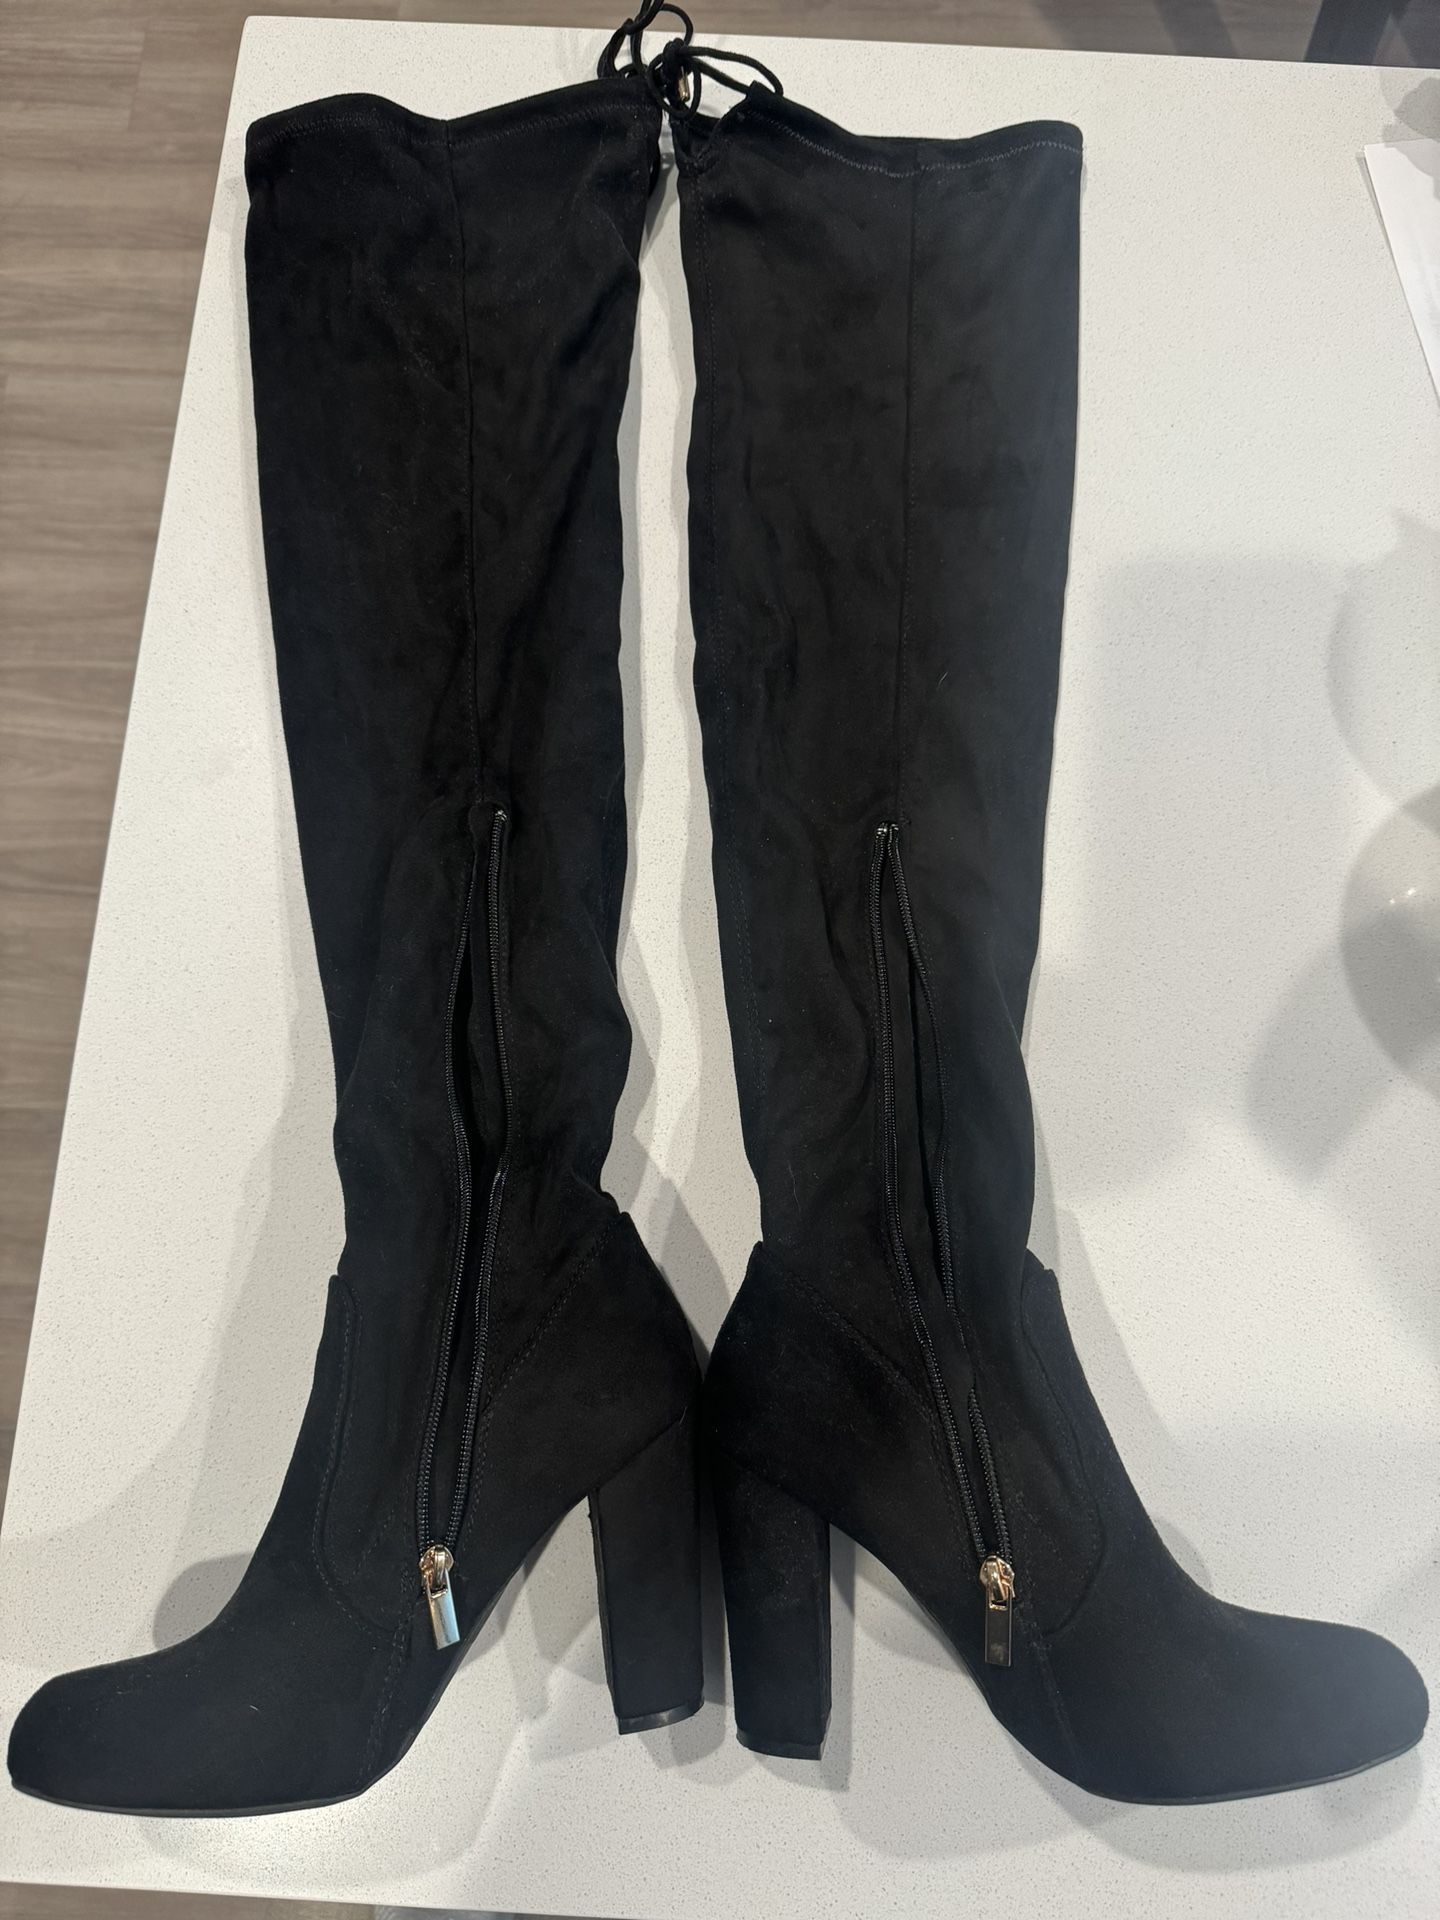 Black Thigh High Boots Size 8-9